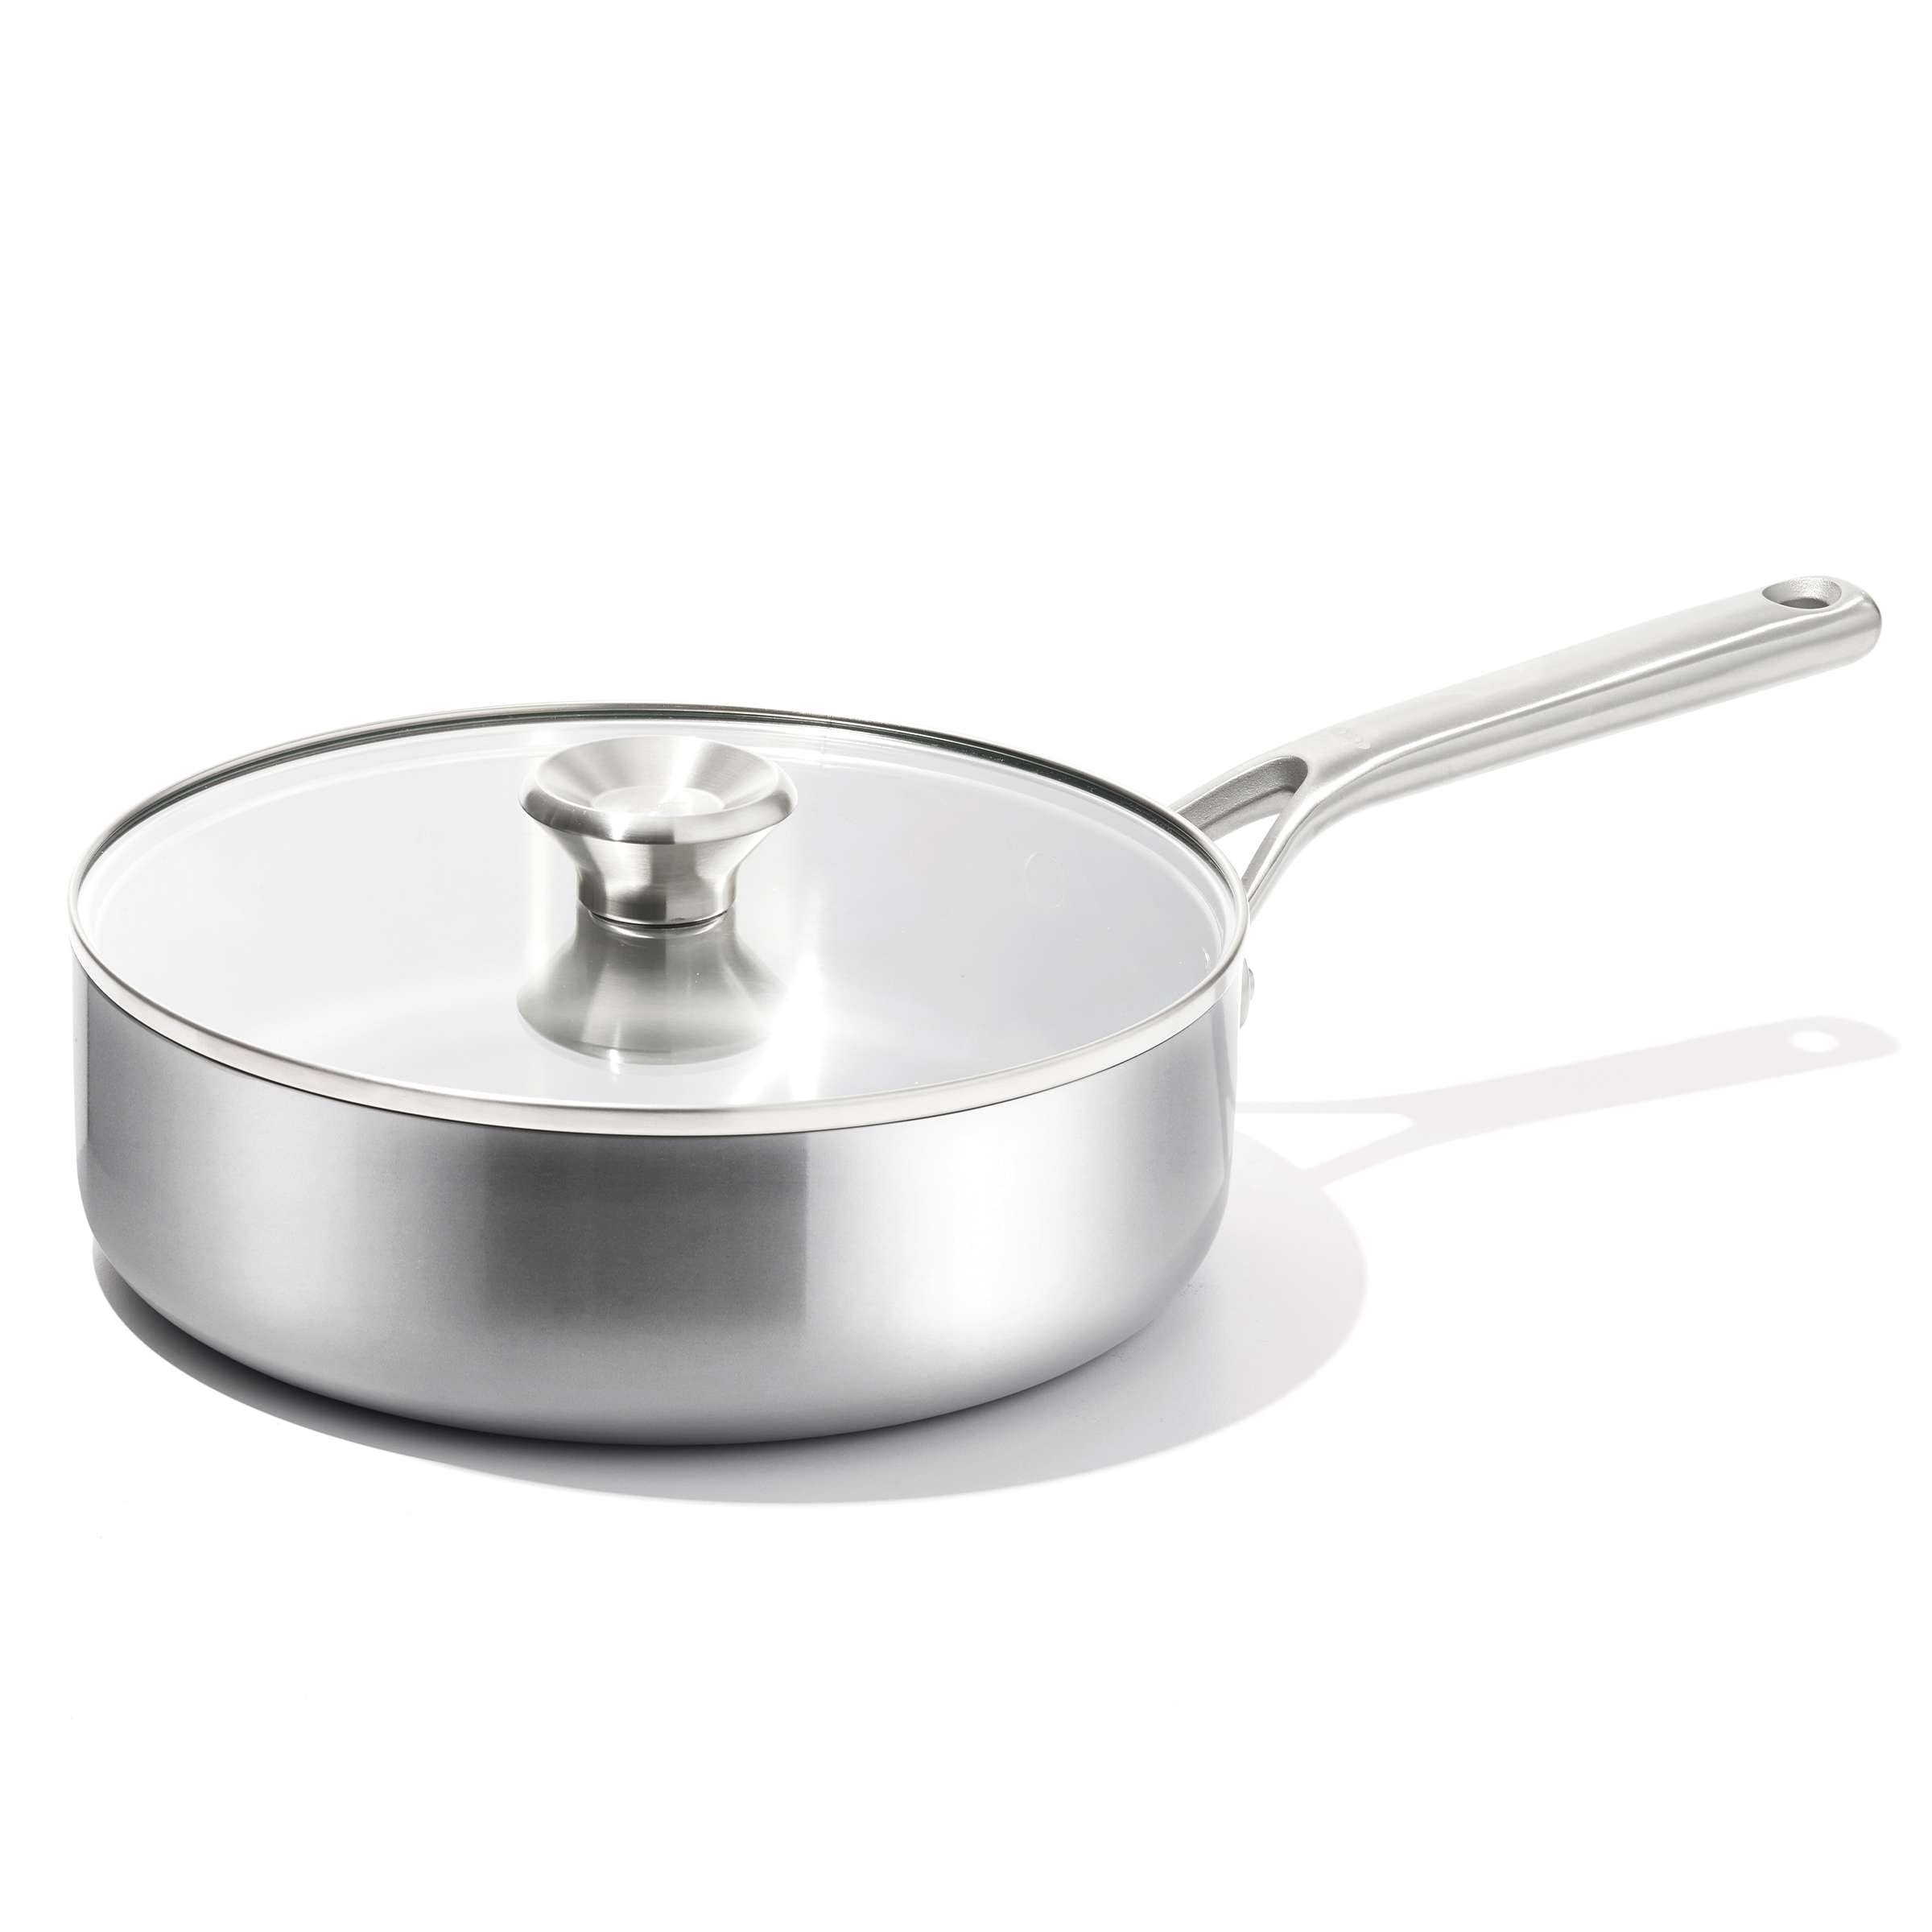 https://ak1.ostkcdn.com/images/products/is/images/direct/5e174d474db77aa10aae2bdf0b45de71f5fda3c4/OXO-Mira-3-Ply-Stainless-Steel-Saut%C3%A9-Pan-with-Lid%2C-3.25-Qt.jpg